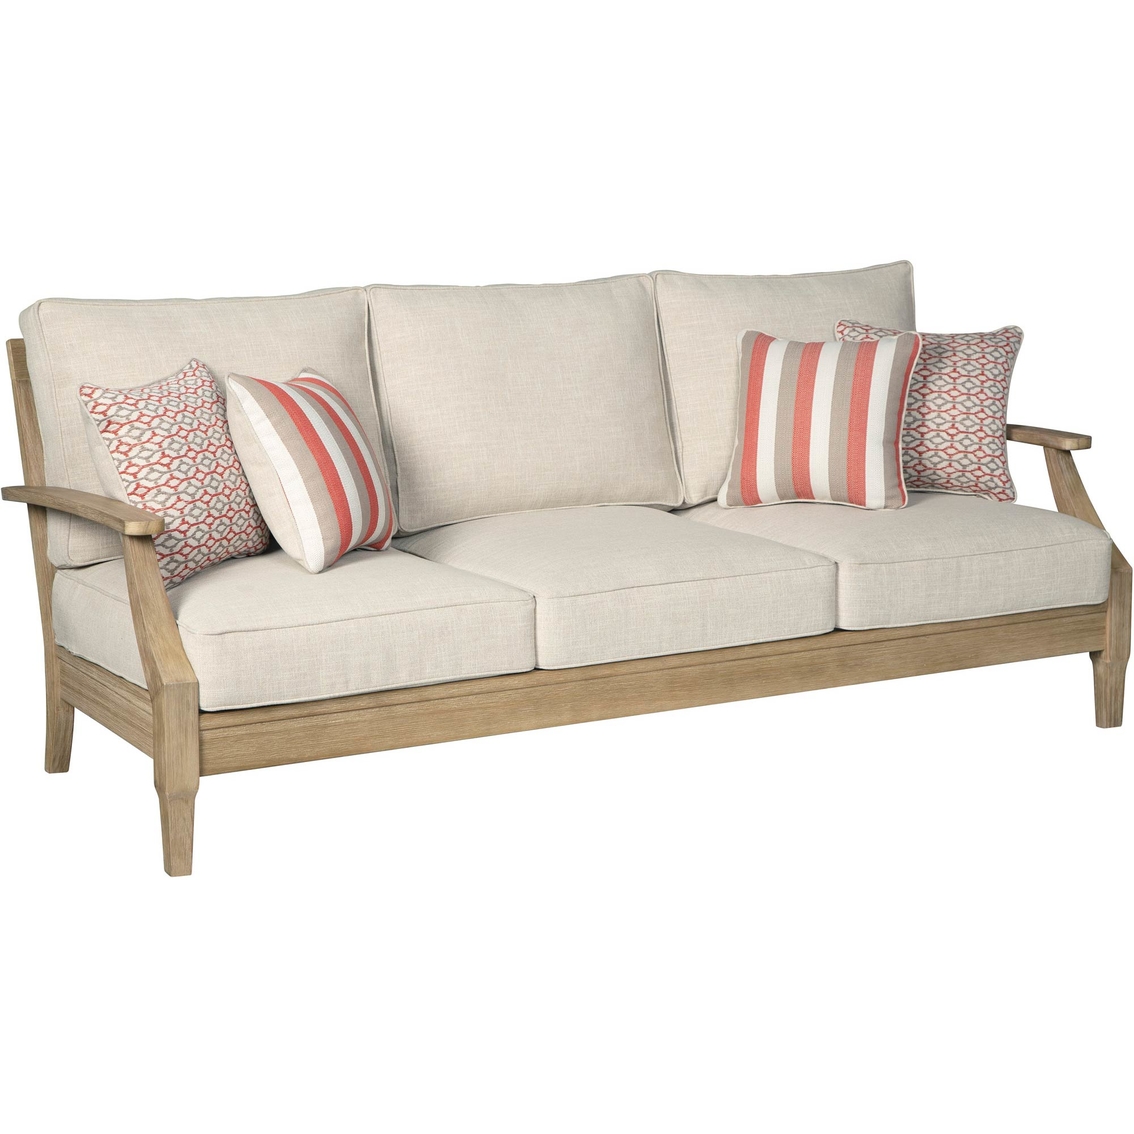 Signature Design by Ashley Clare View 4 pc. Outdoor Sofa Set - Image 3 of 7